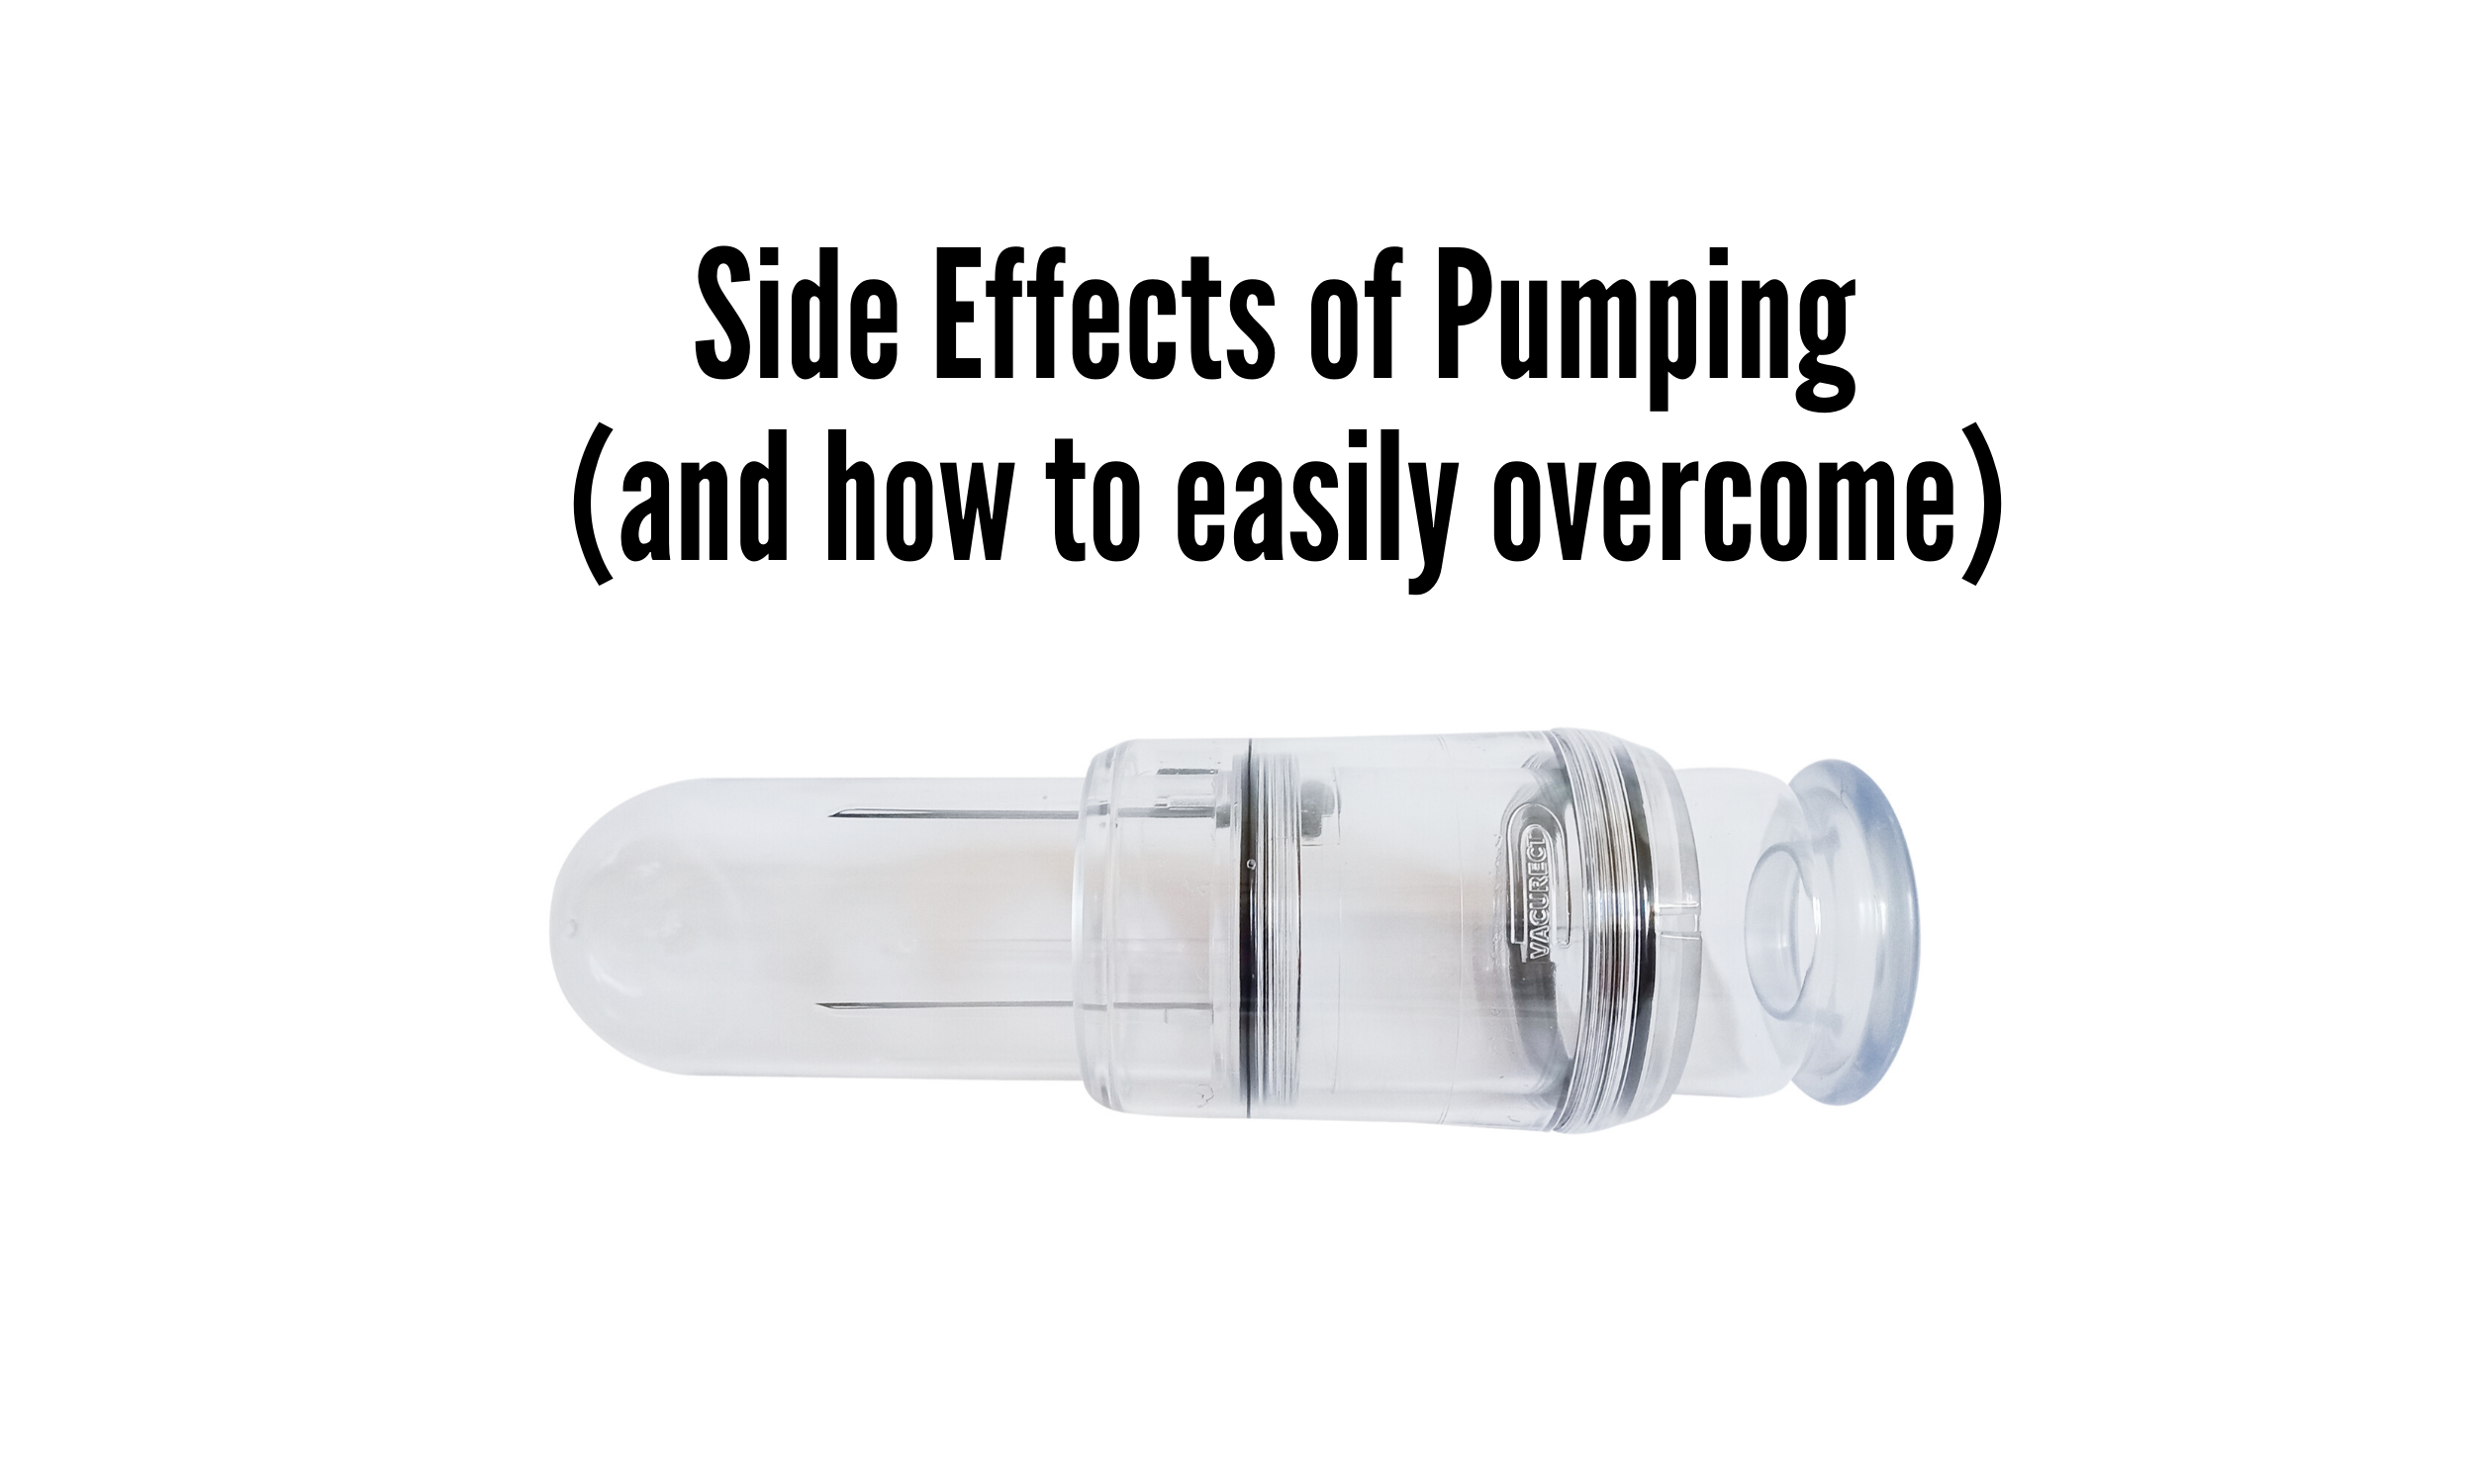 Five Penis Pump Side Effects image image